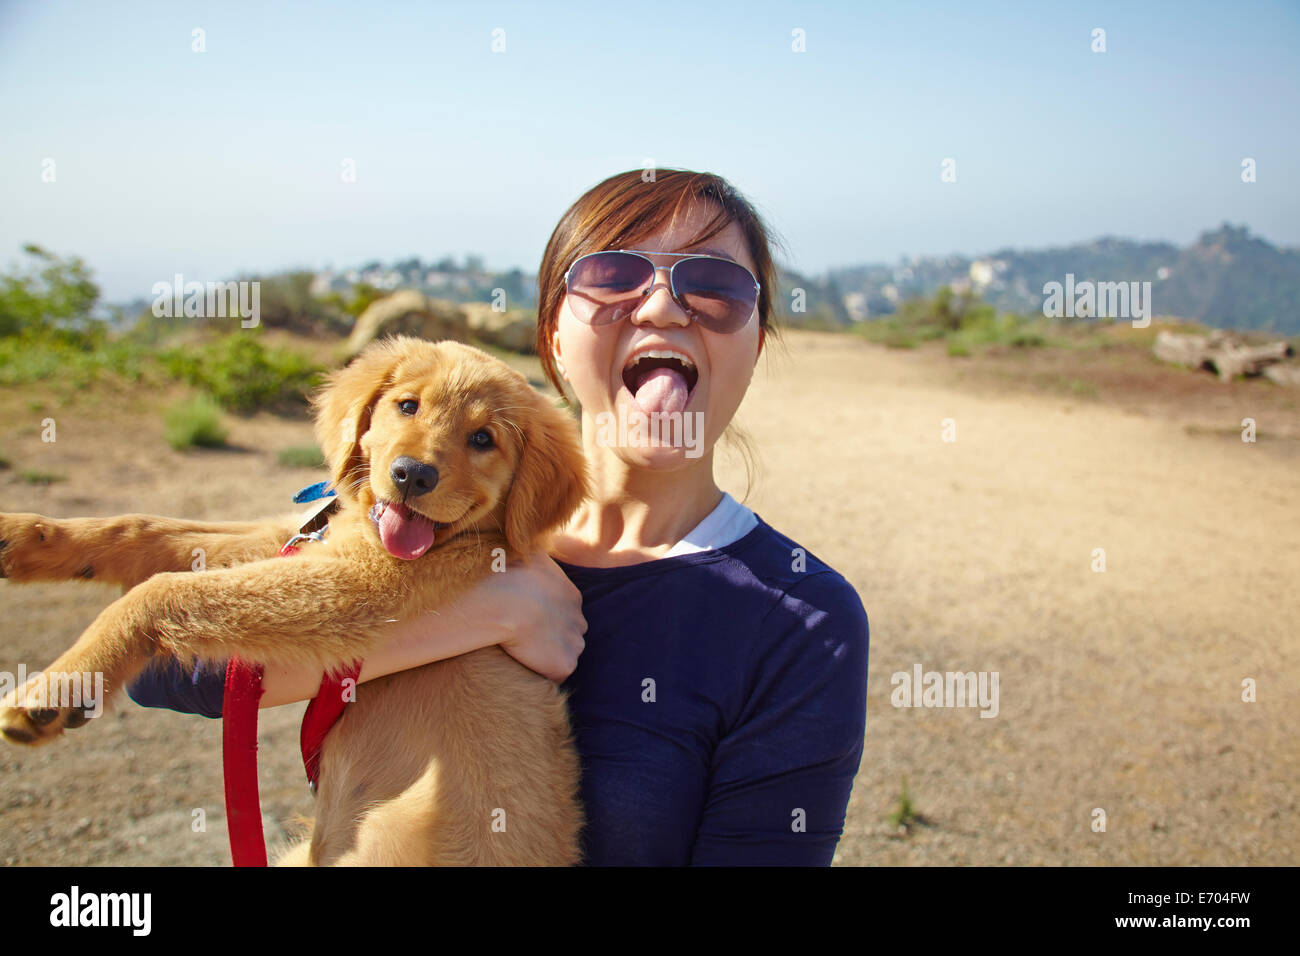 Young woman holding labrador puppy, tongues out Stock Photo